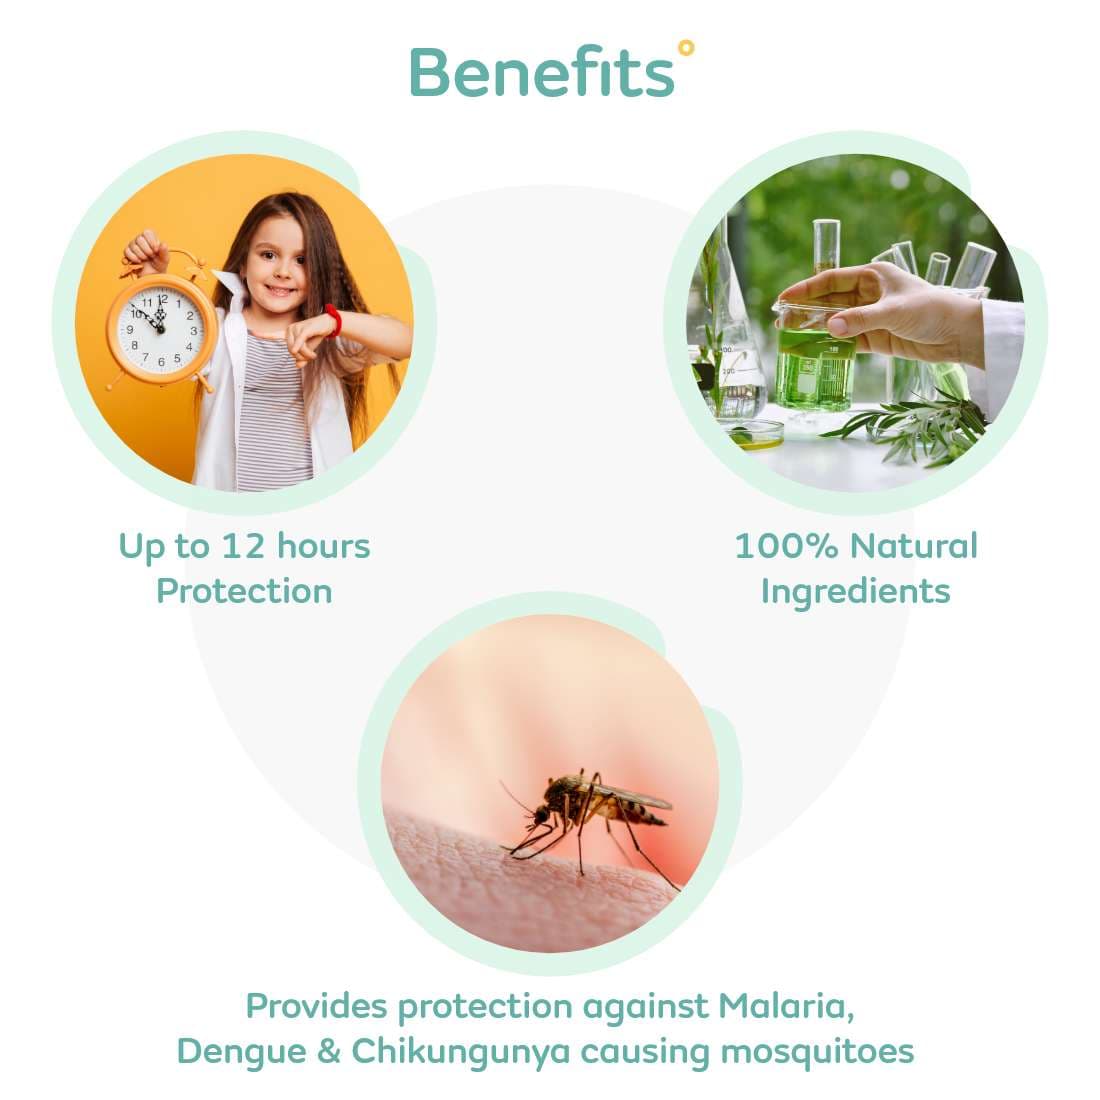  Mosquito Repellent Patches (Pack of 24)